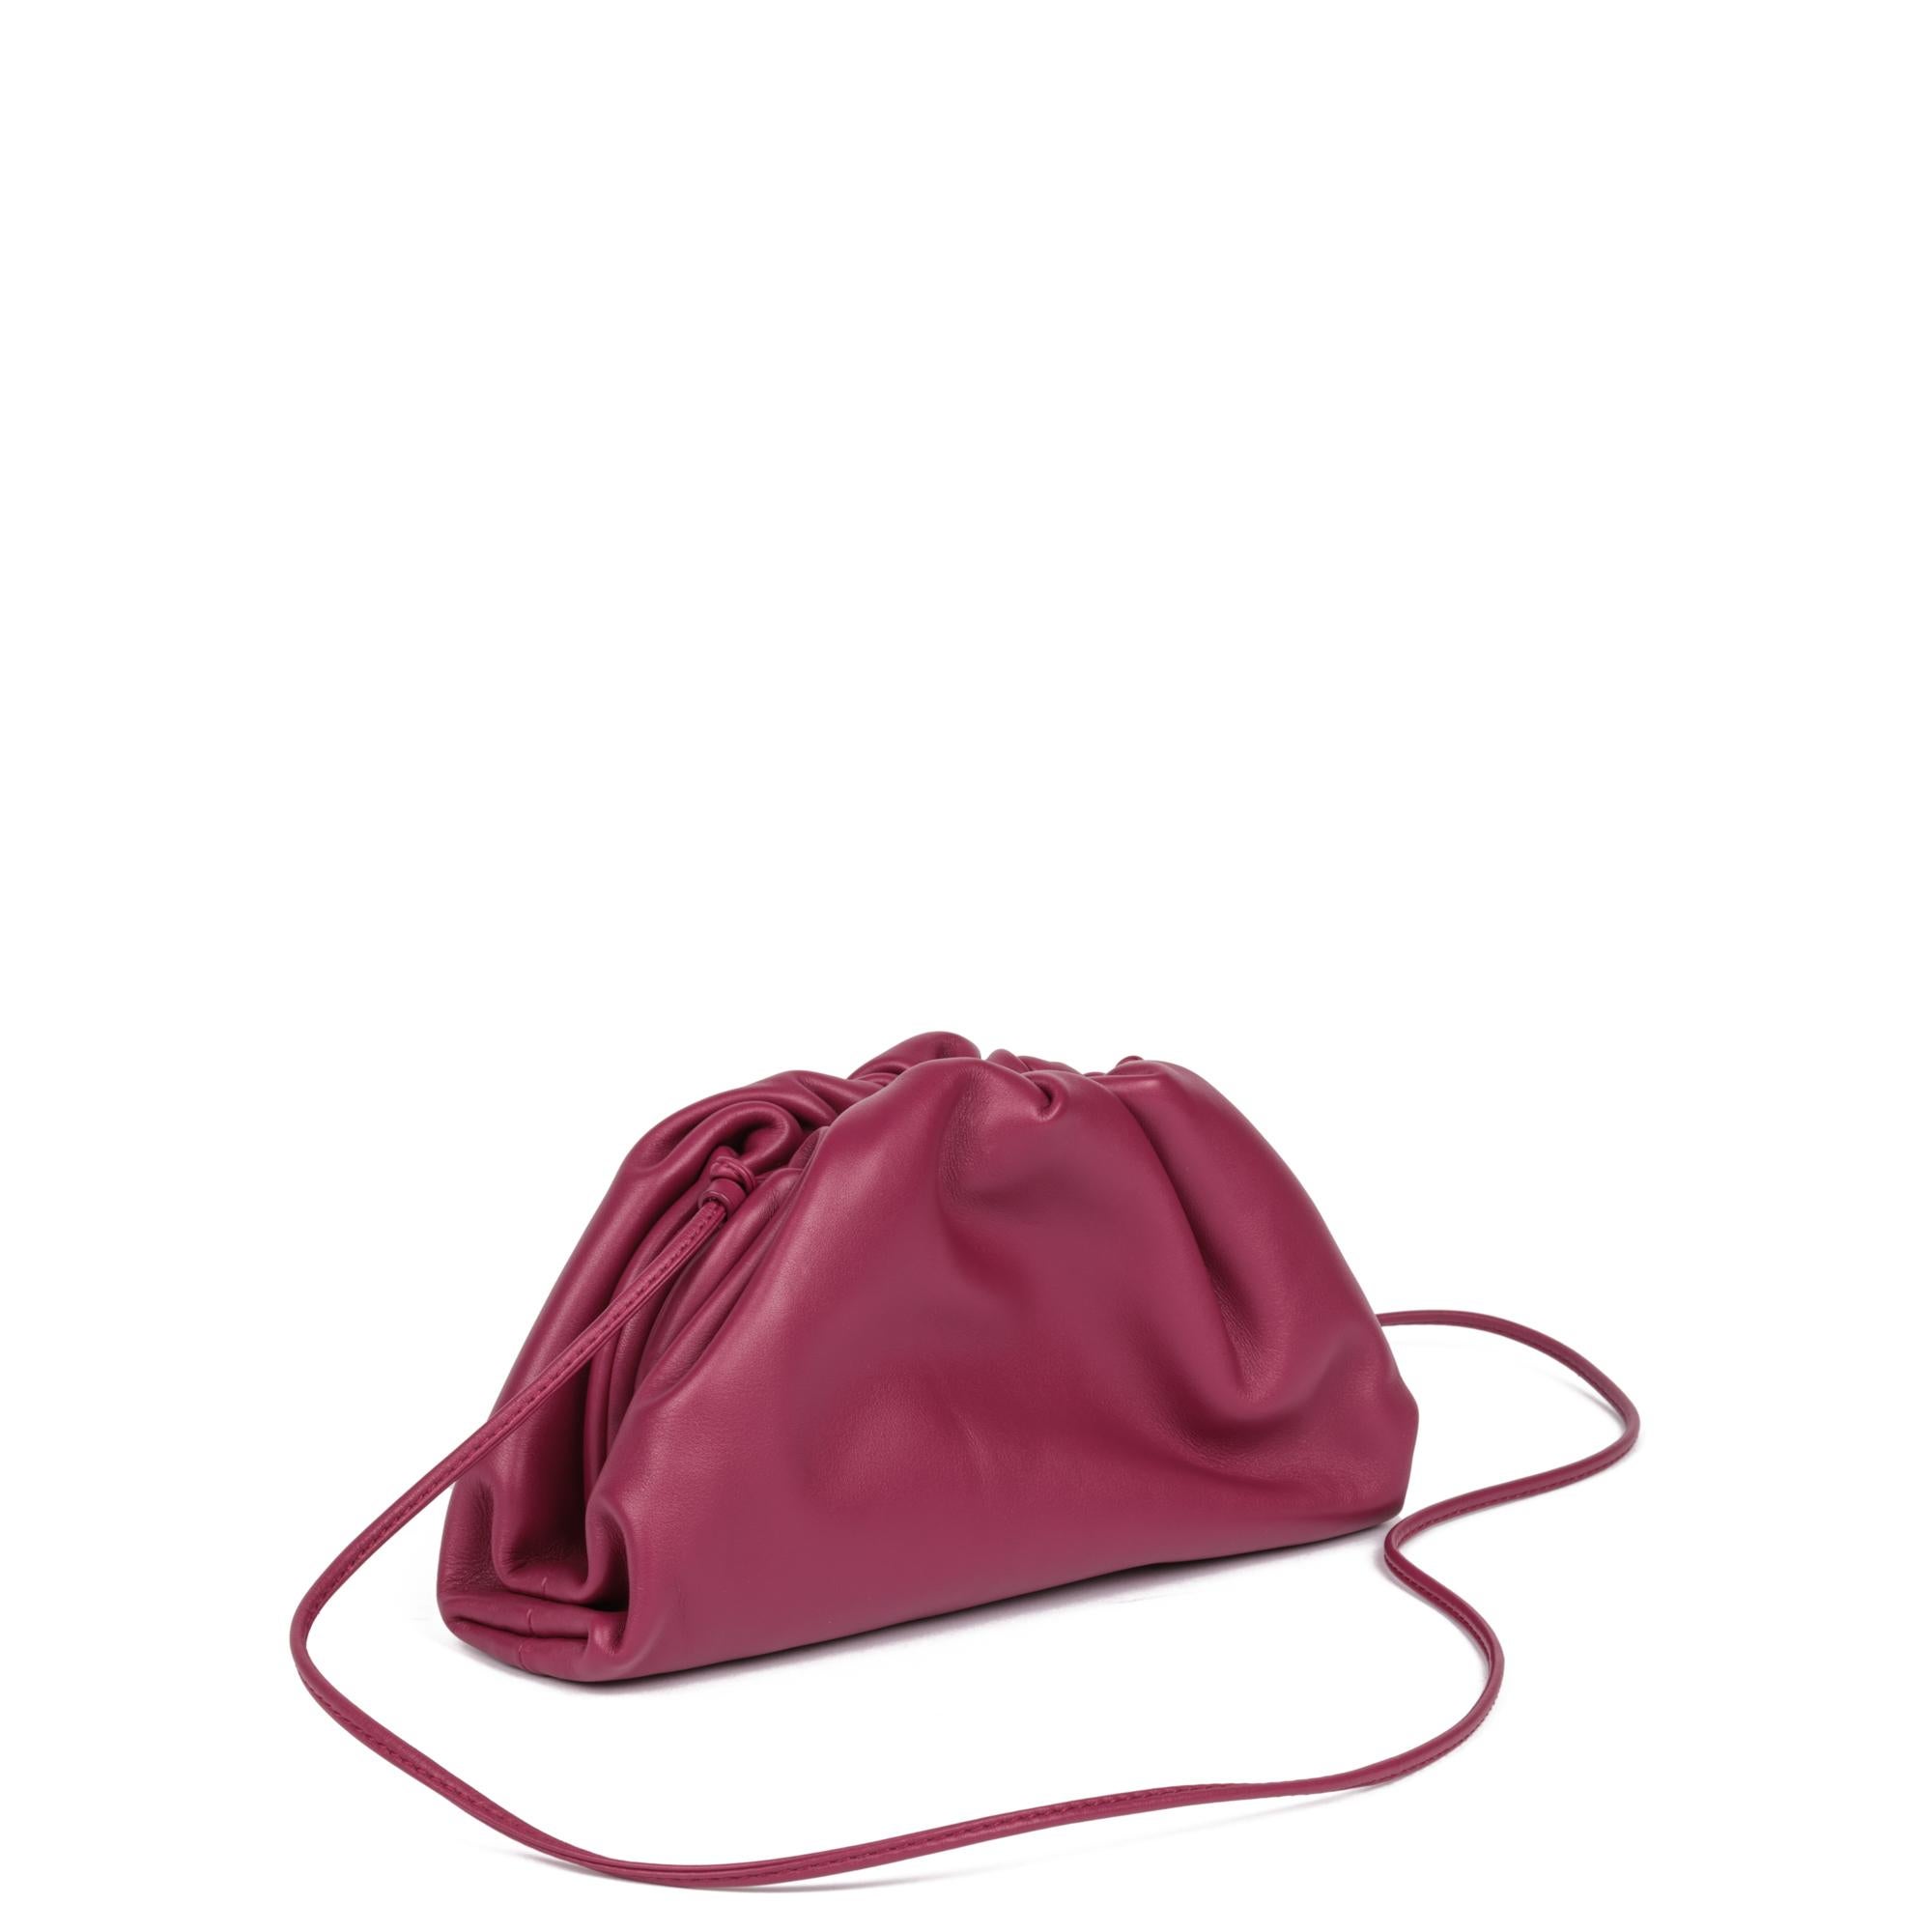 BOTTEGA VENETA
Cinnabar Calfskin Leather Mini The Pouch

Xupes Reference: CB853
Serial Number: B09551232B
Age (Circa): 2022
Authenticity Details: Date Code (Made in Italy)
Gender: Ladies
Type: Shoulder, Crossbody, Clutch

Colour: Cinnabar
Hardware: